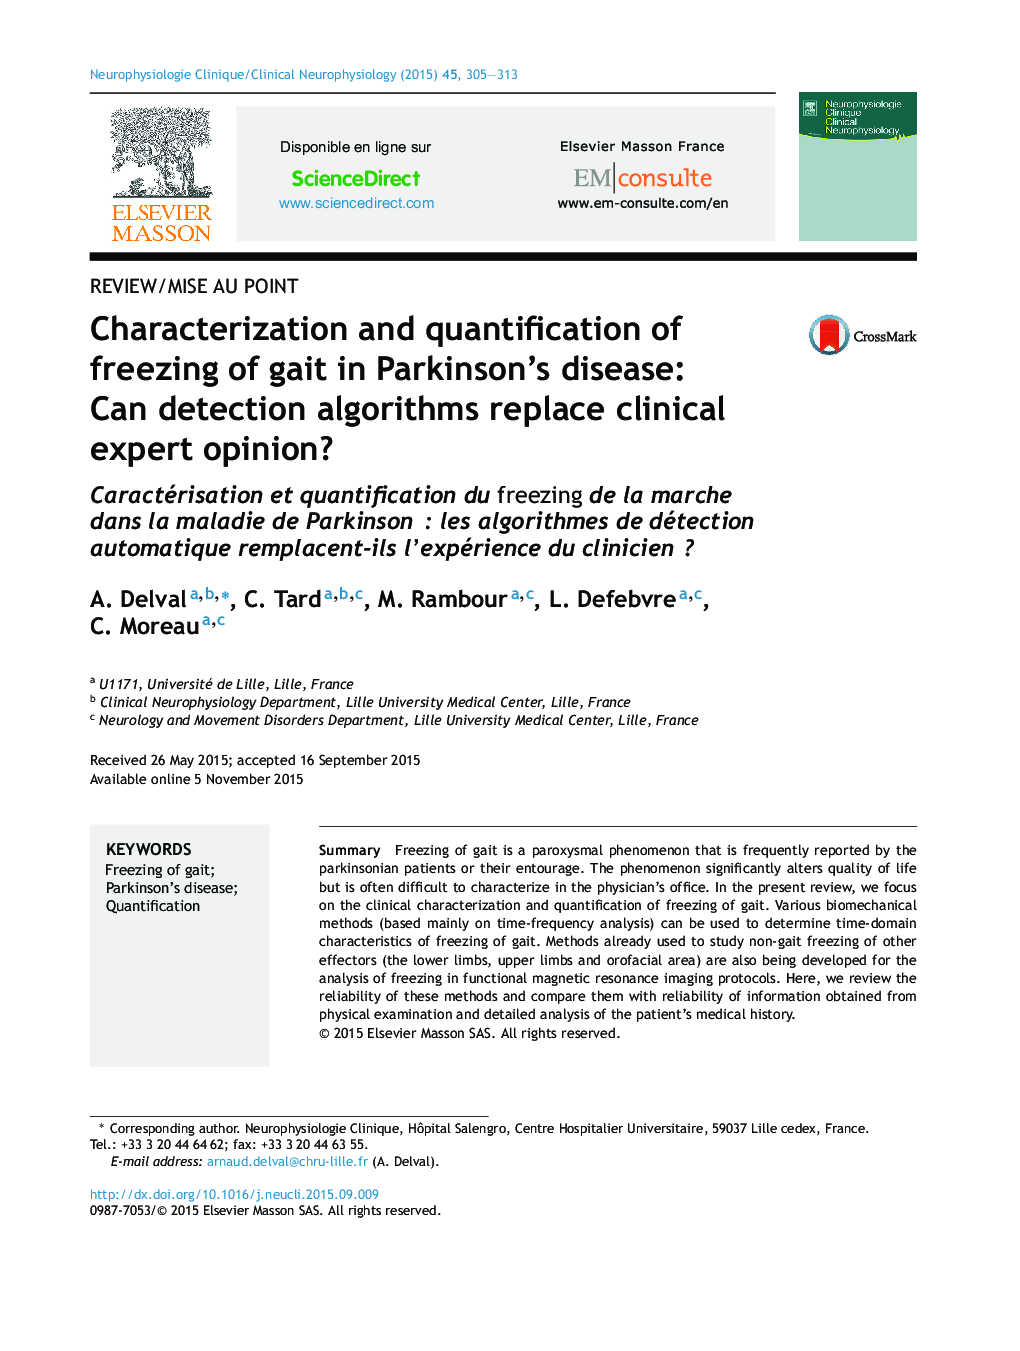 Characterization and quantification of freezing of gait in Parkinson's disease: Can detection algorithms replace clinical expert opinion?